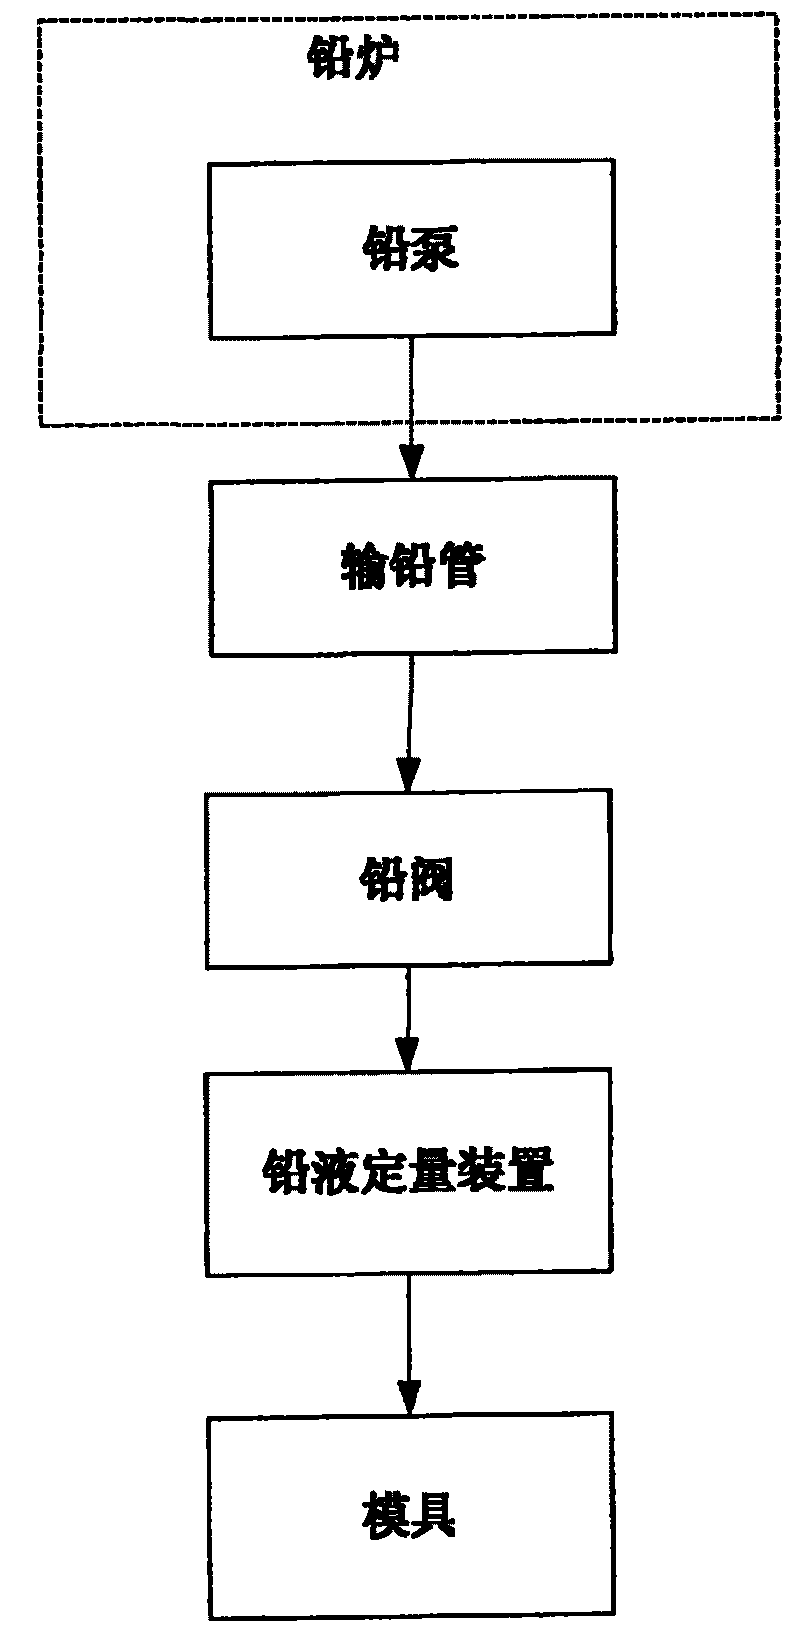 Lead liquid dosing device and plate-casting machine